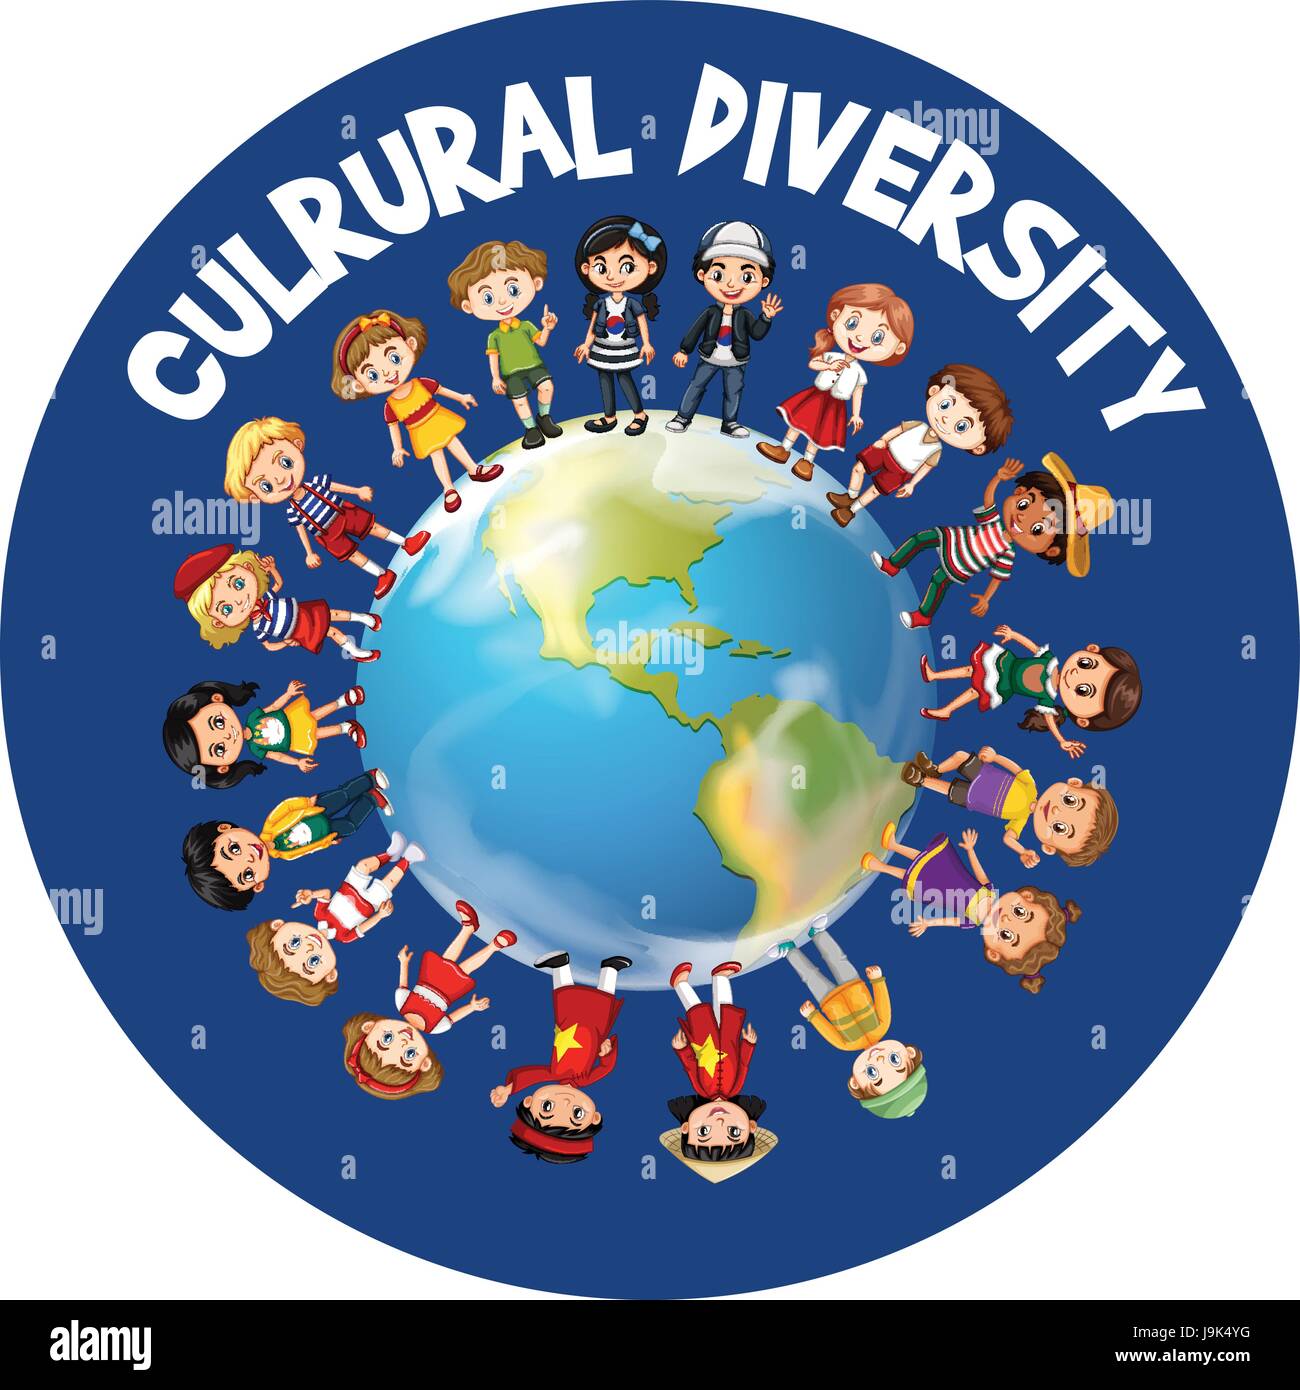 Cultural diversity around the world illustration Stock Vector Image